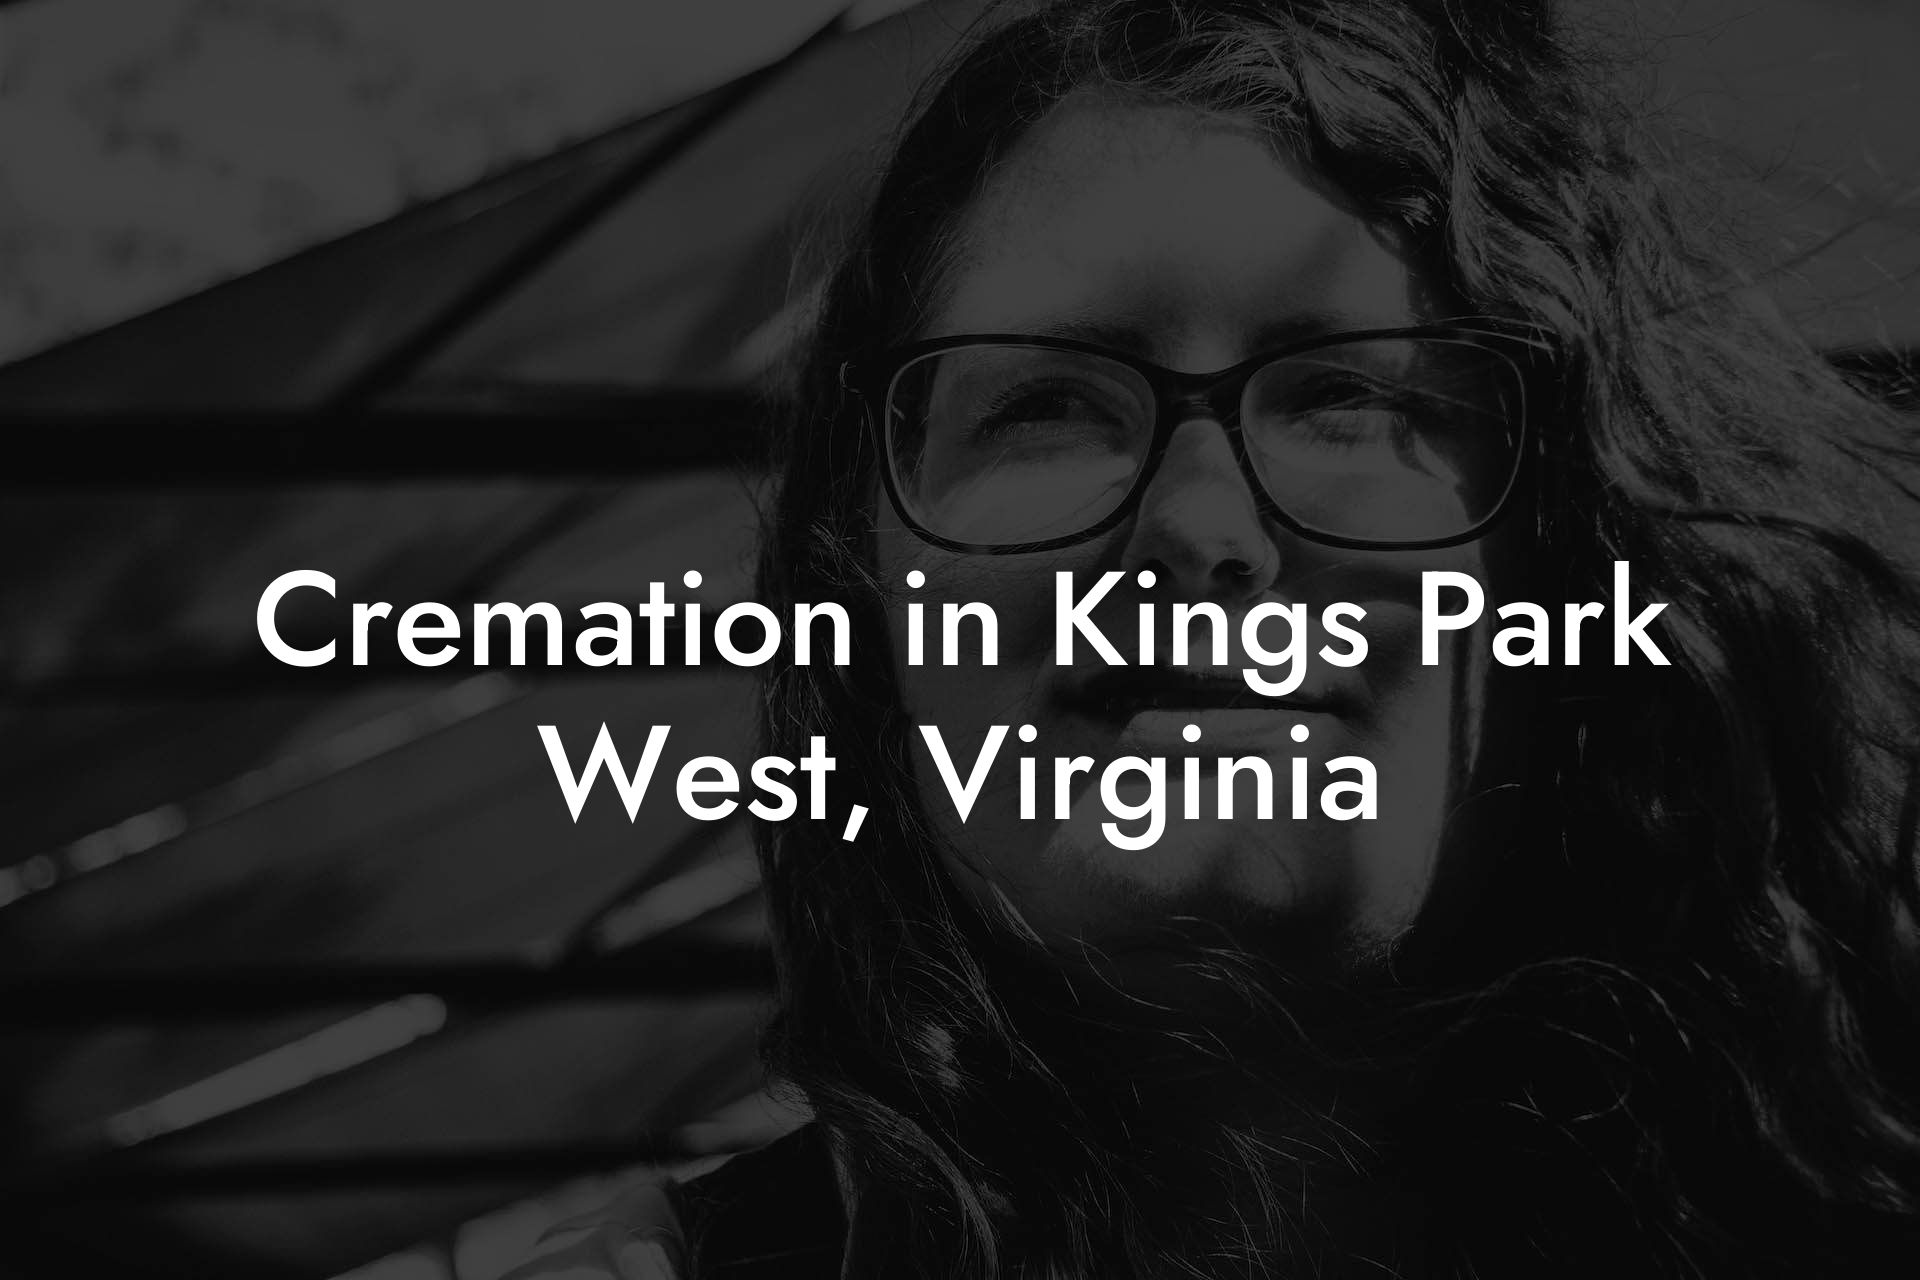 Cremation in Kings Park West, Virginia